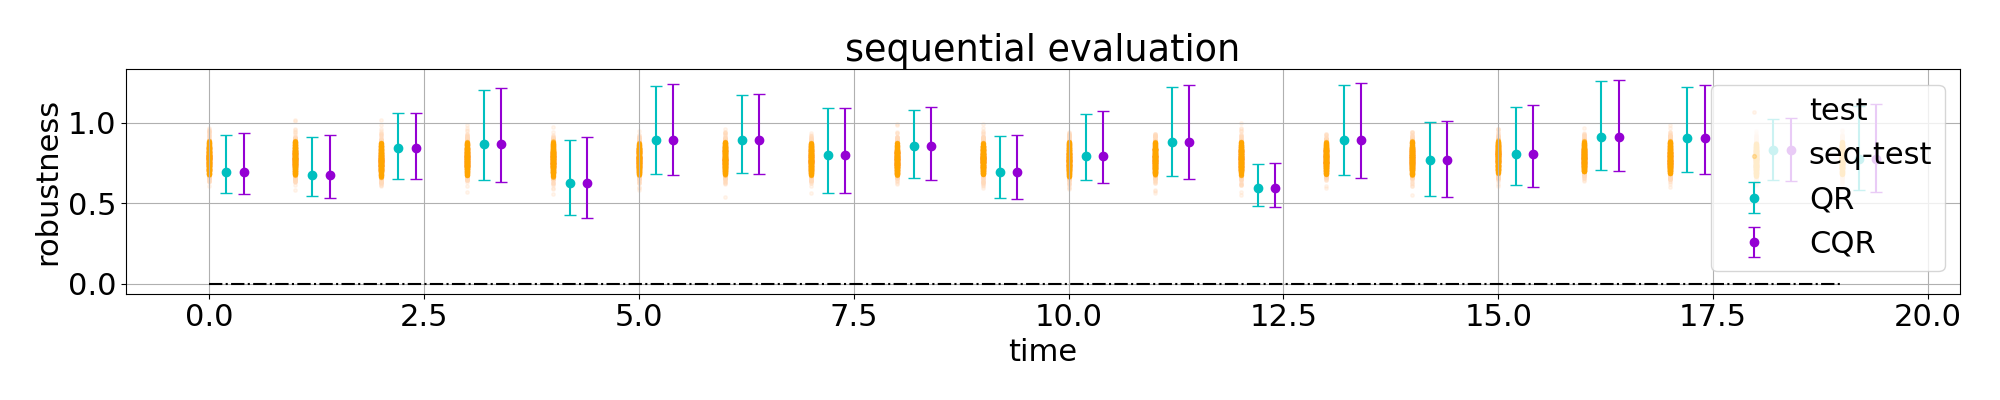 sequential_evaluation.png